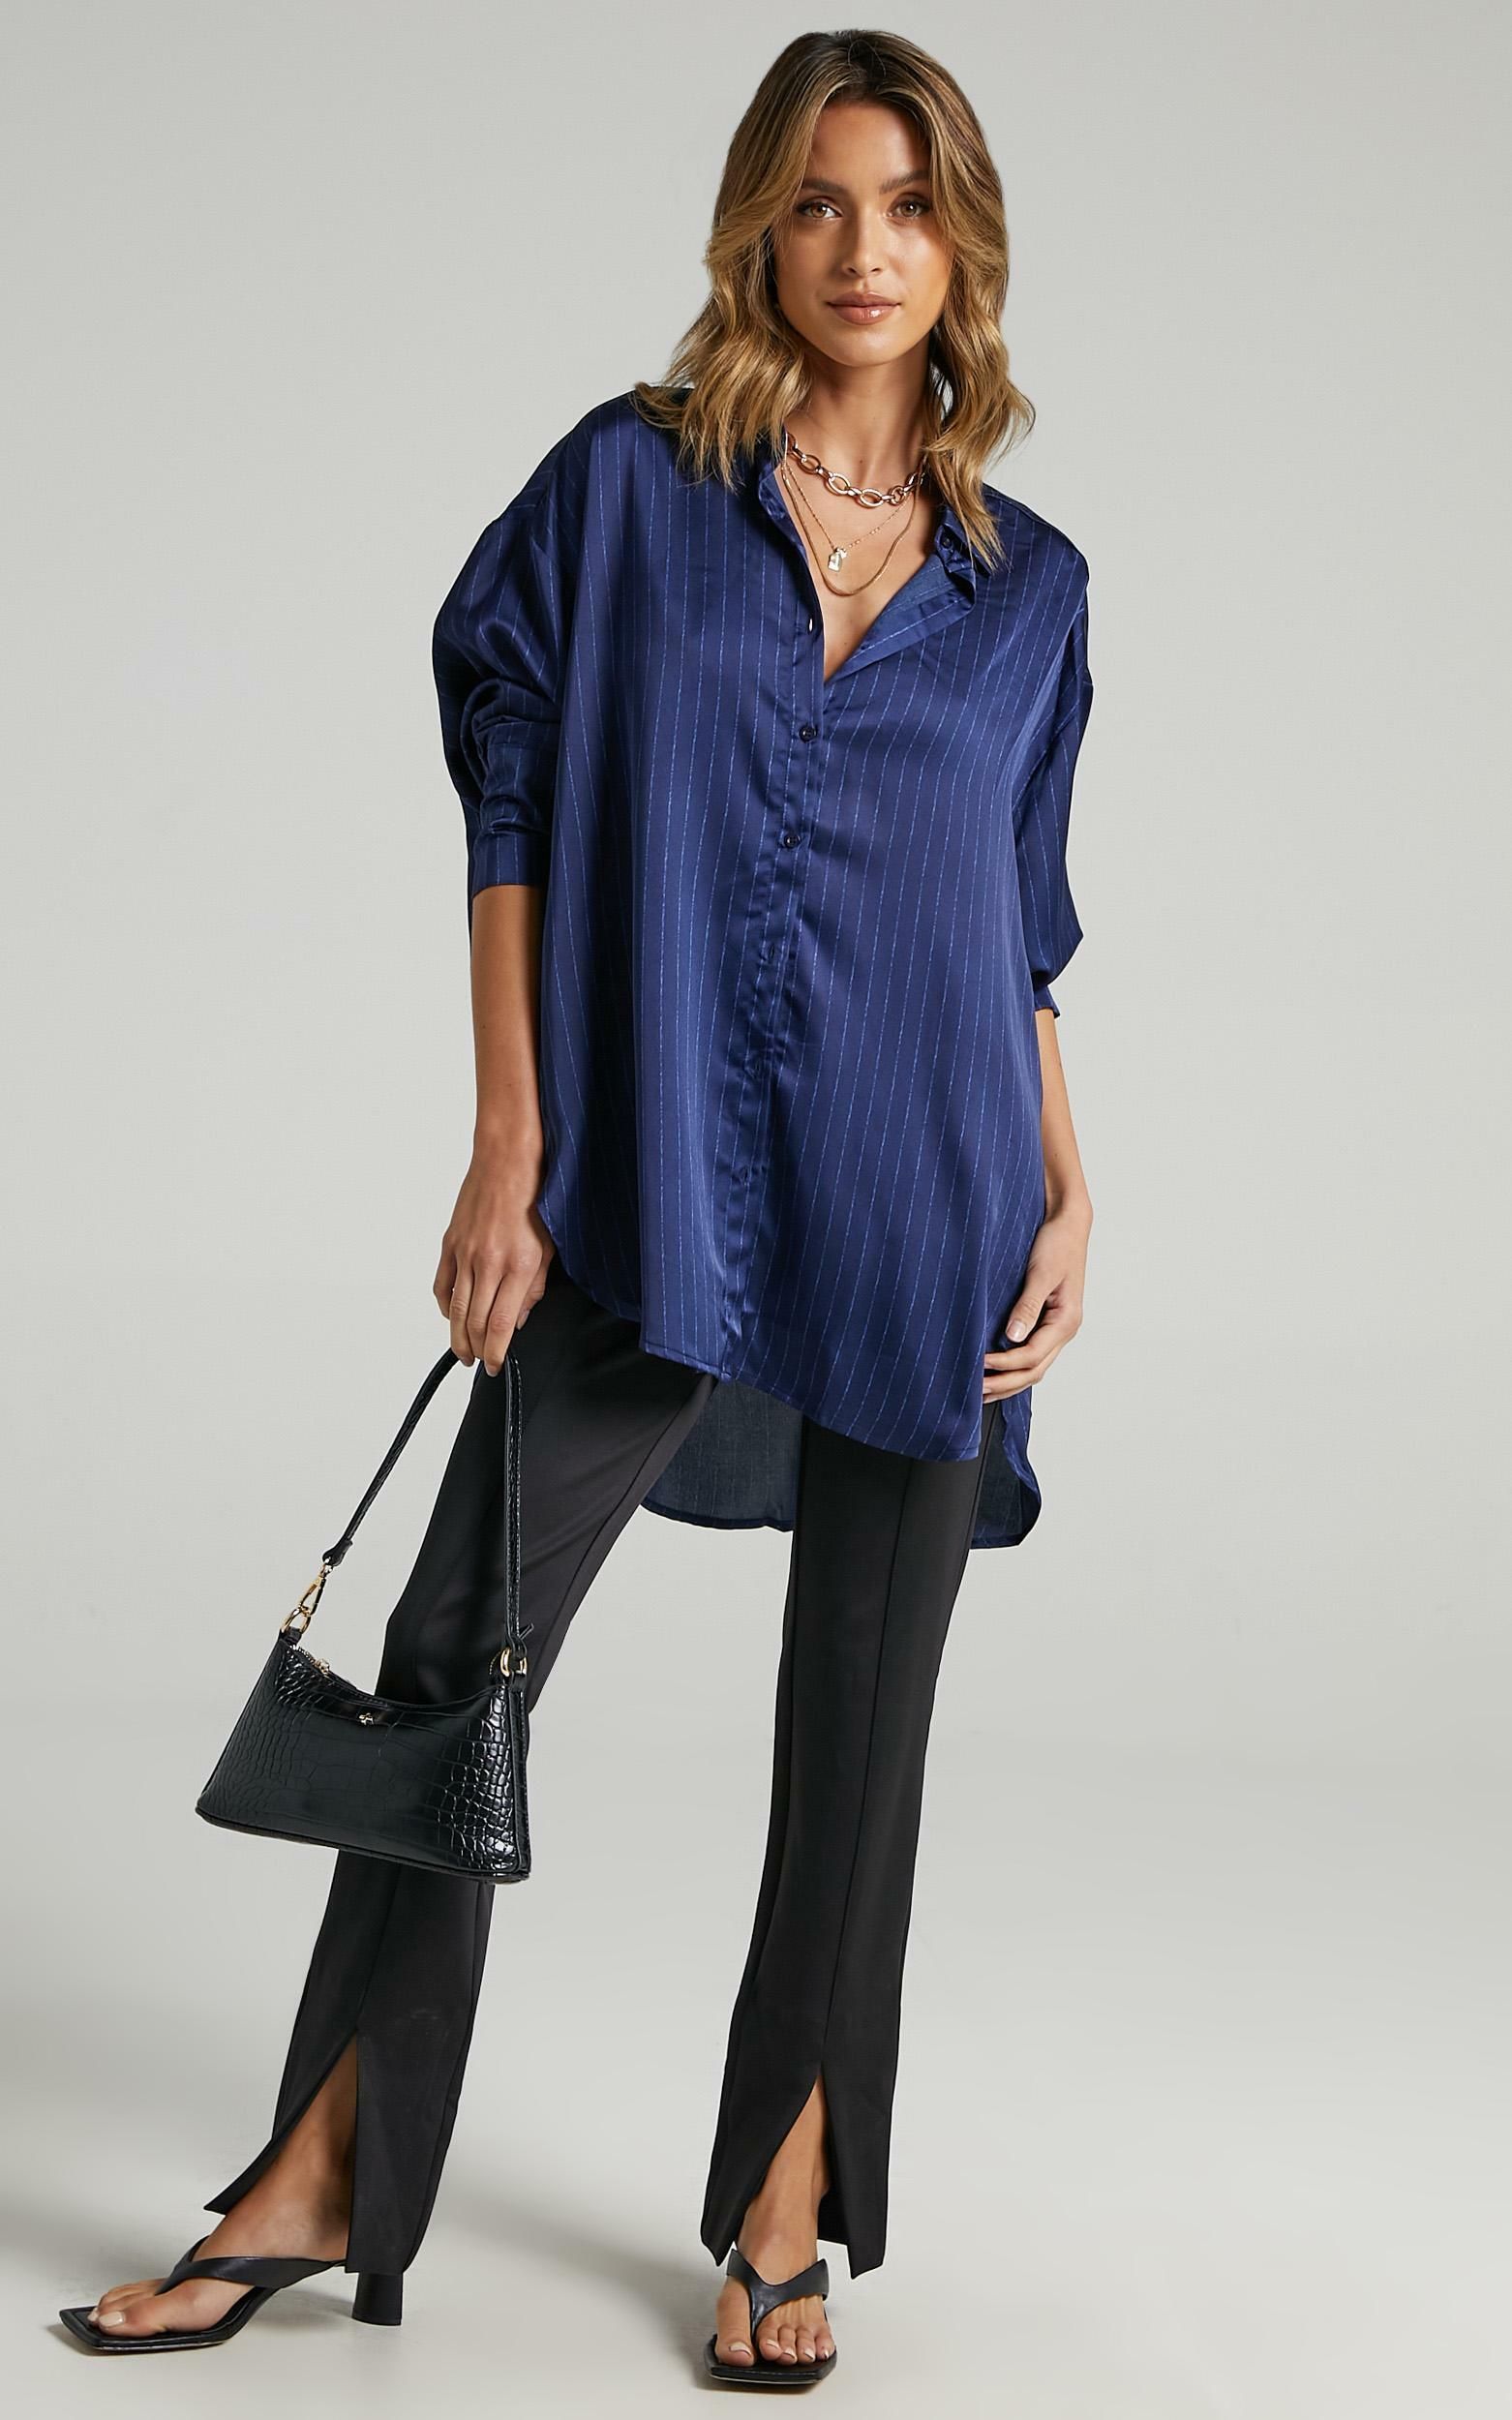 Lioness - Not Your Average Shirt in Midnight Pinstripe | Showpo - deactived